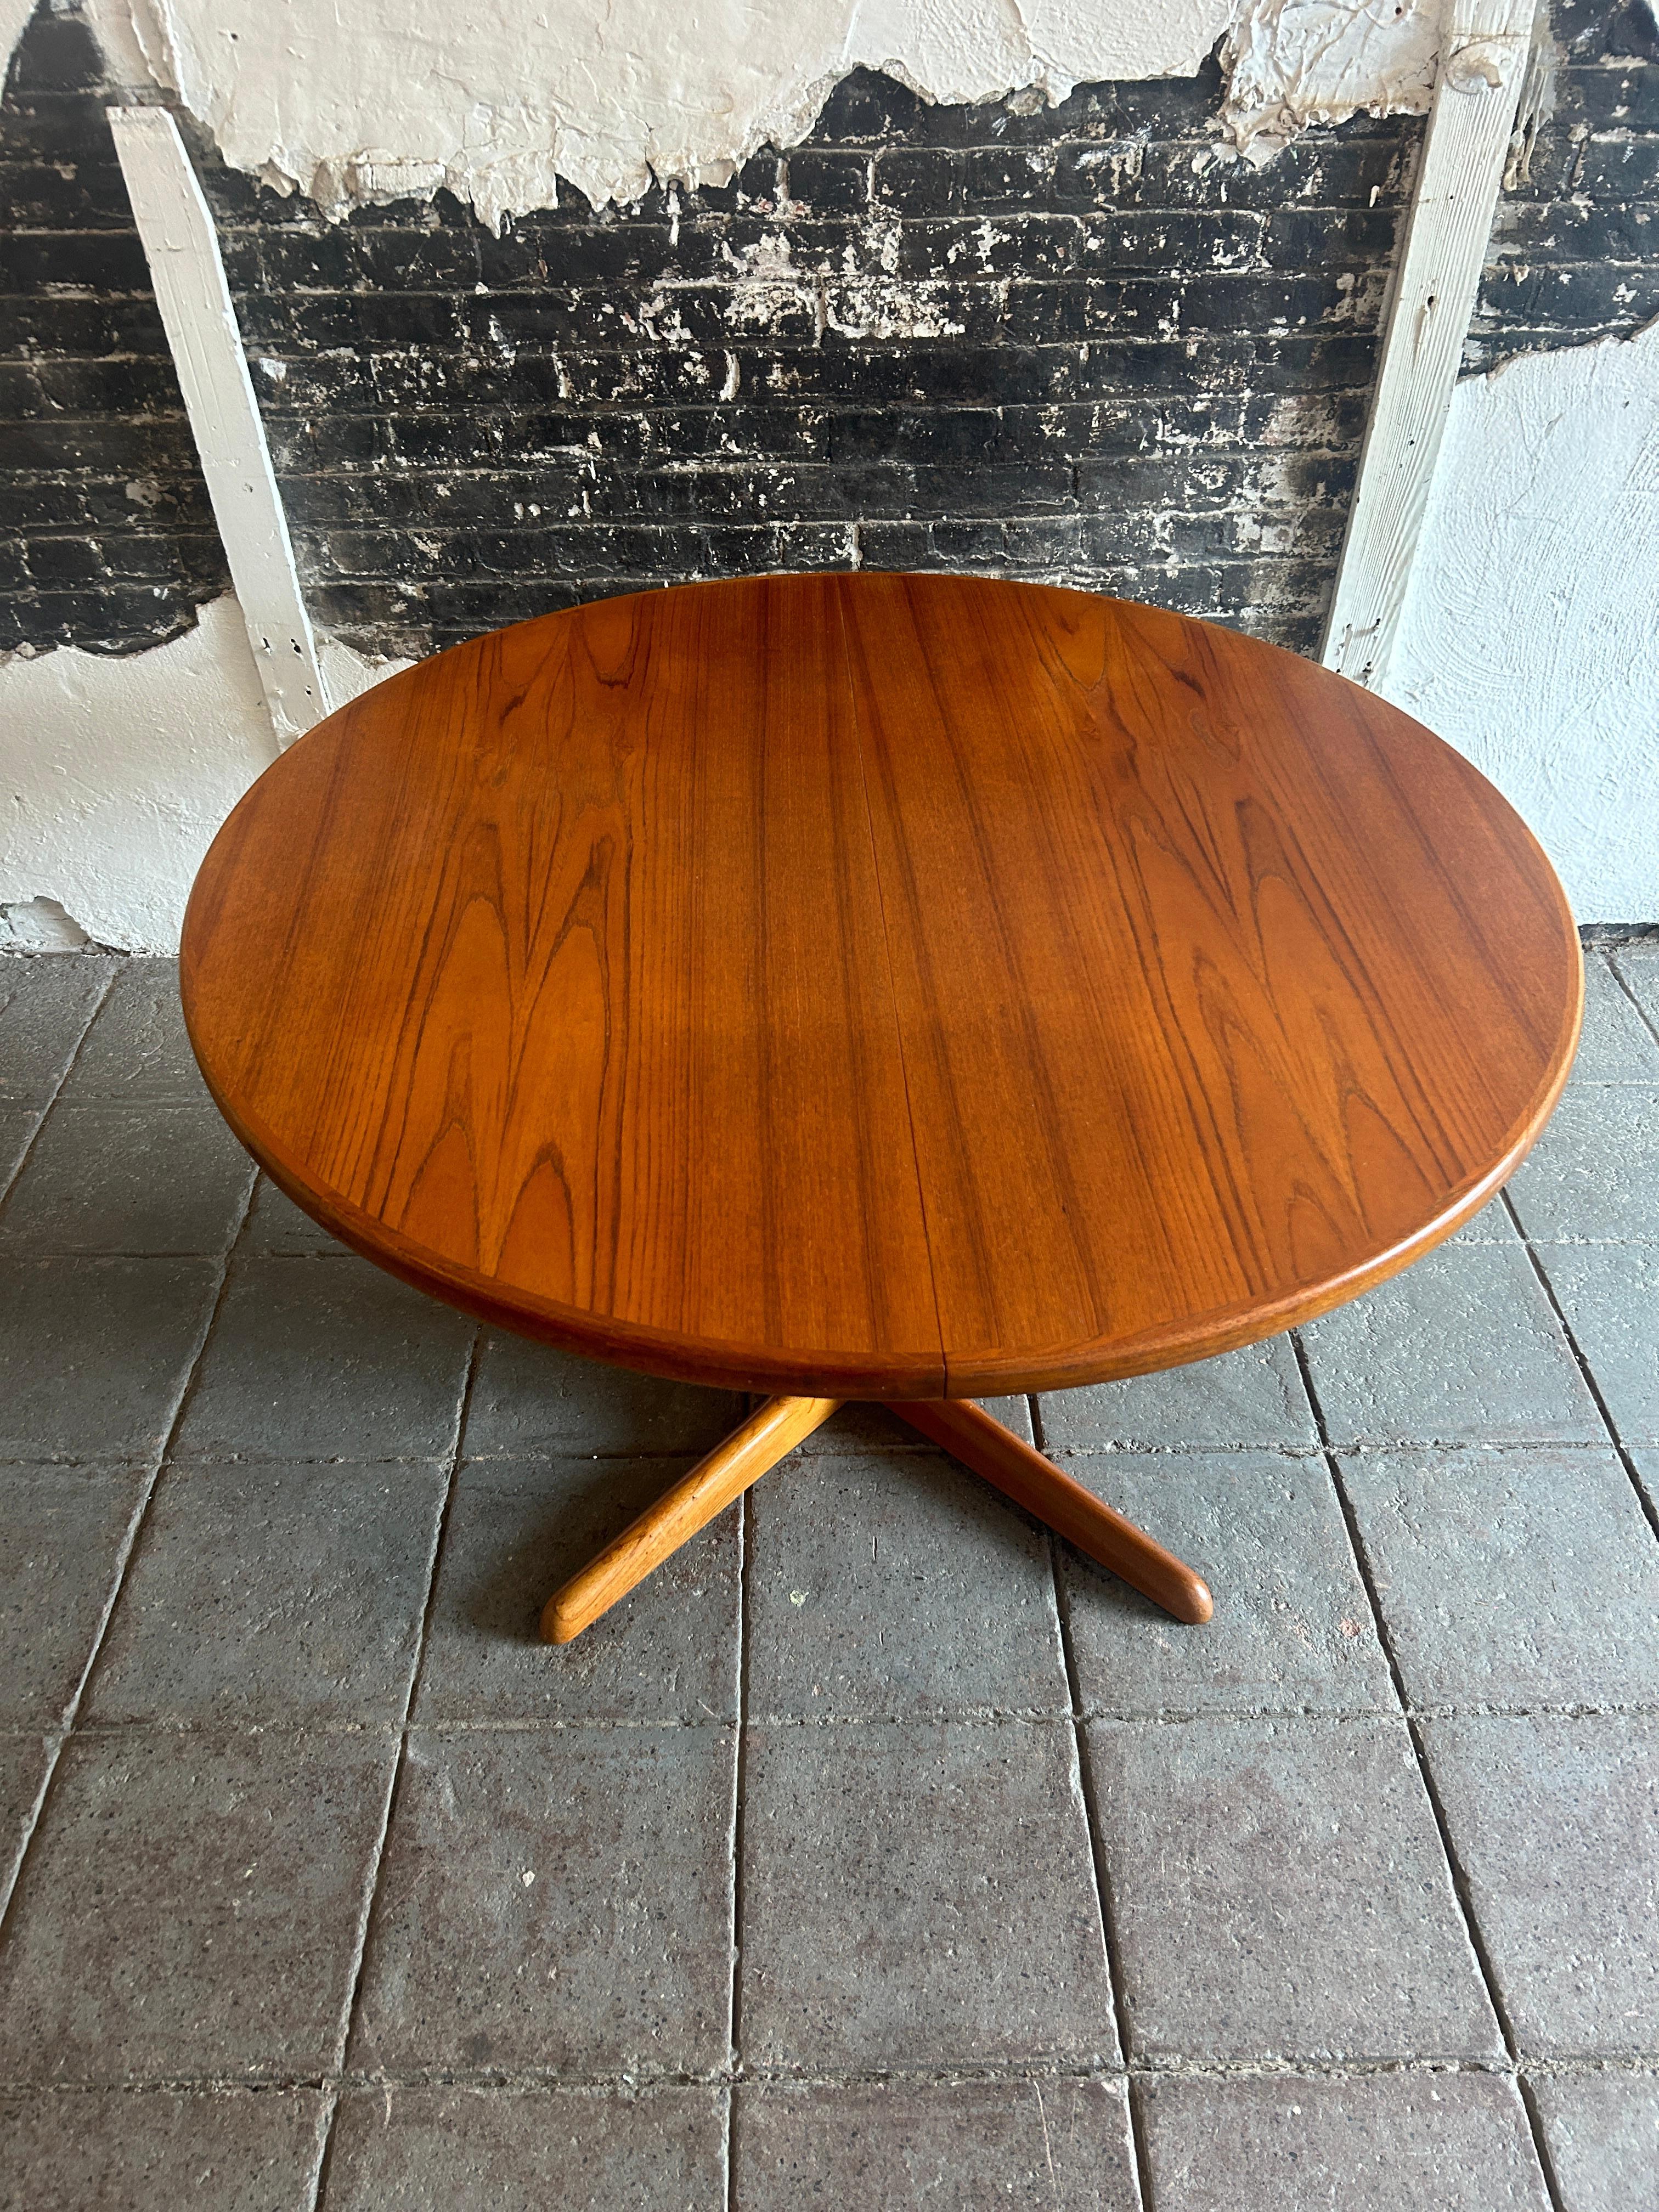 Stunning midcentury Teak Round Danish Modern extension dining table with (2) leaves. This table has beautiful Teak Veneer top with Solid Teak corners and wood legs. This table is in beautiful condition with Golden brown black teak wood tones very